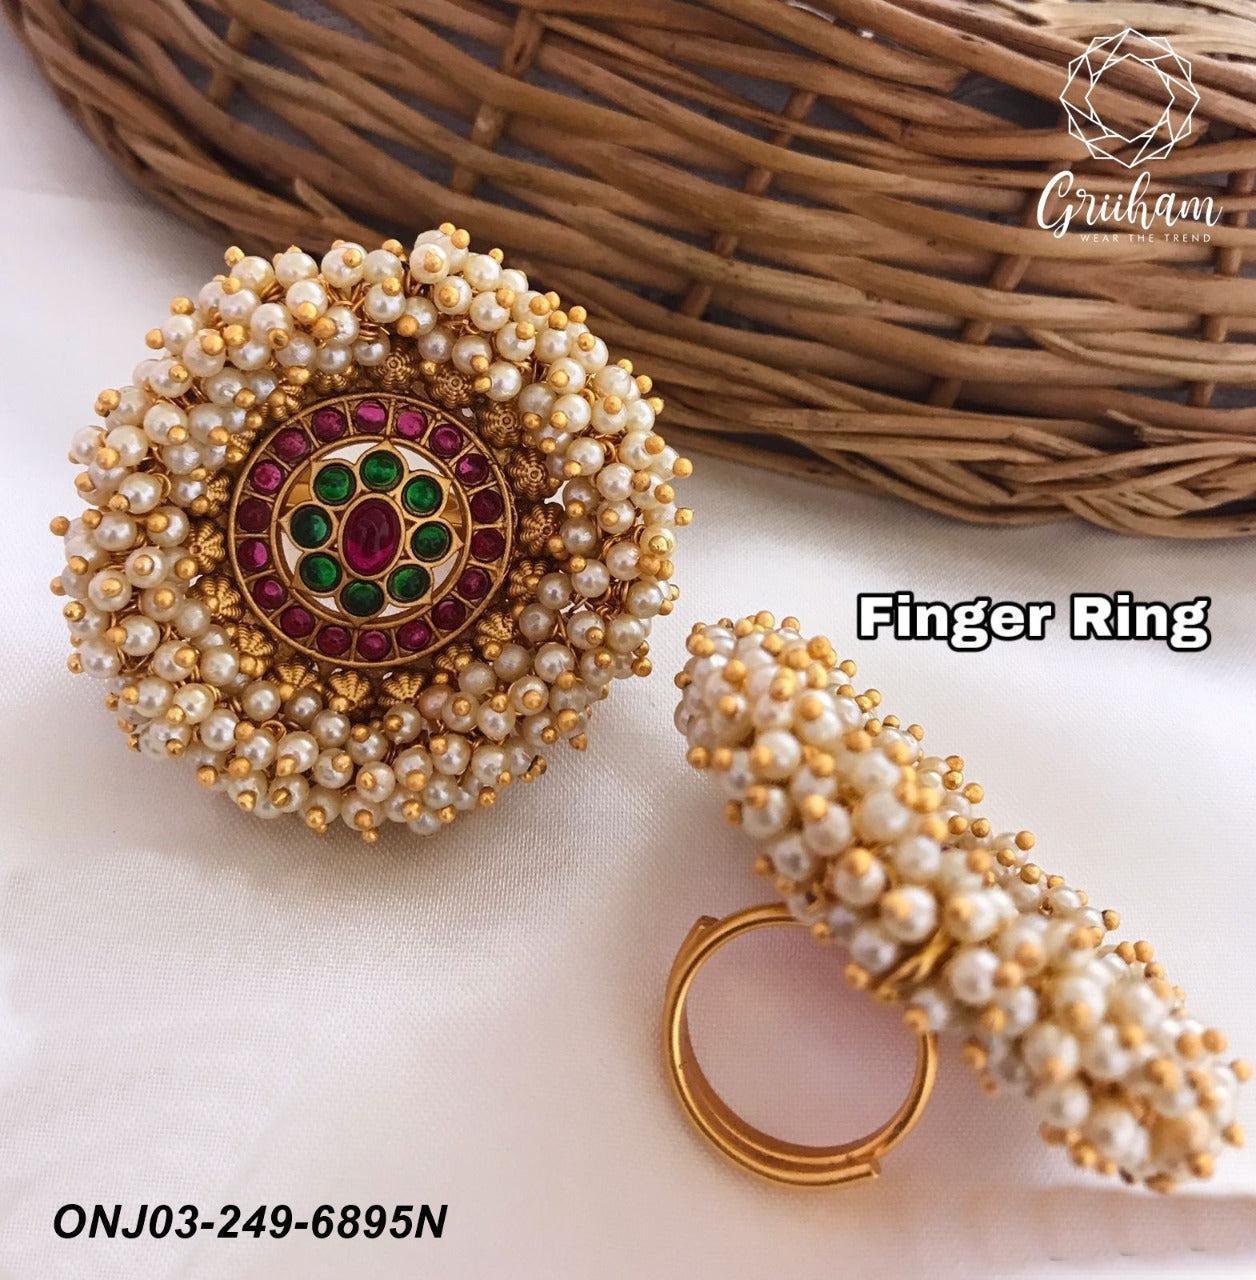 Gold Plated Adjustable Size Finger ring with Stones and Pearls 6895N